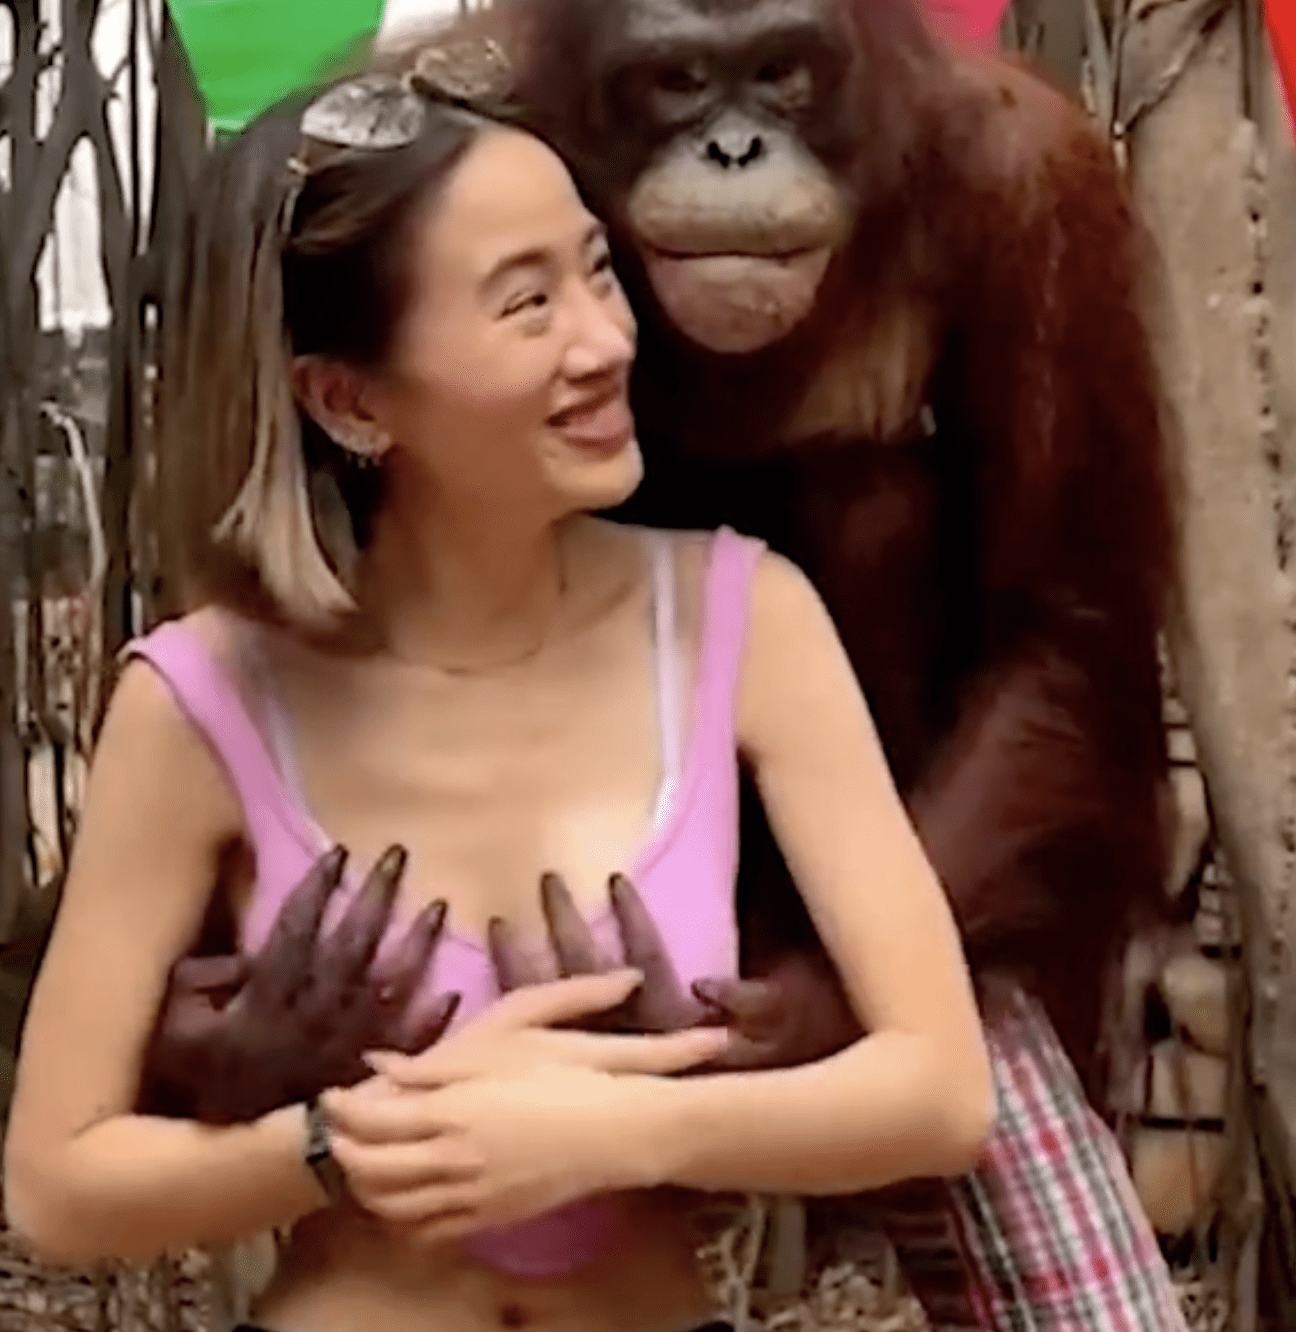 orangutan gropes giggling woman's breasts at Thai zoo where his antics have made him a star attraction